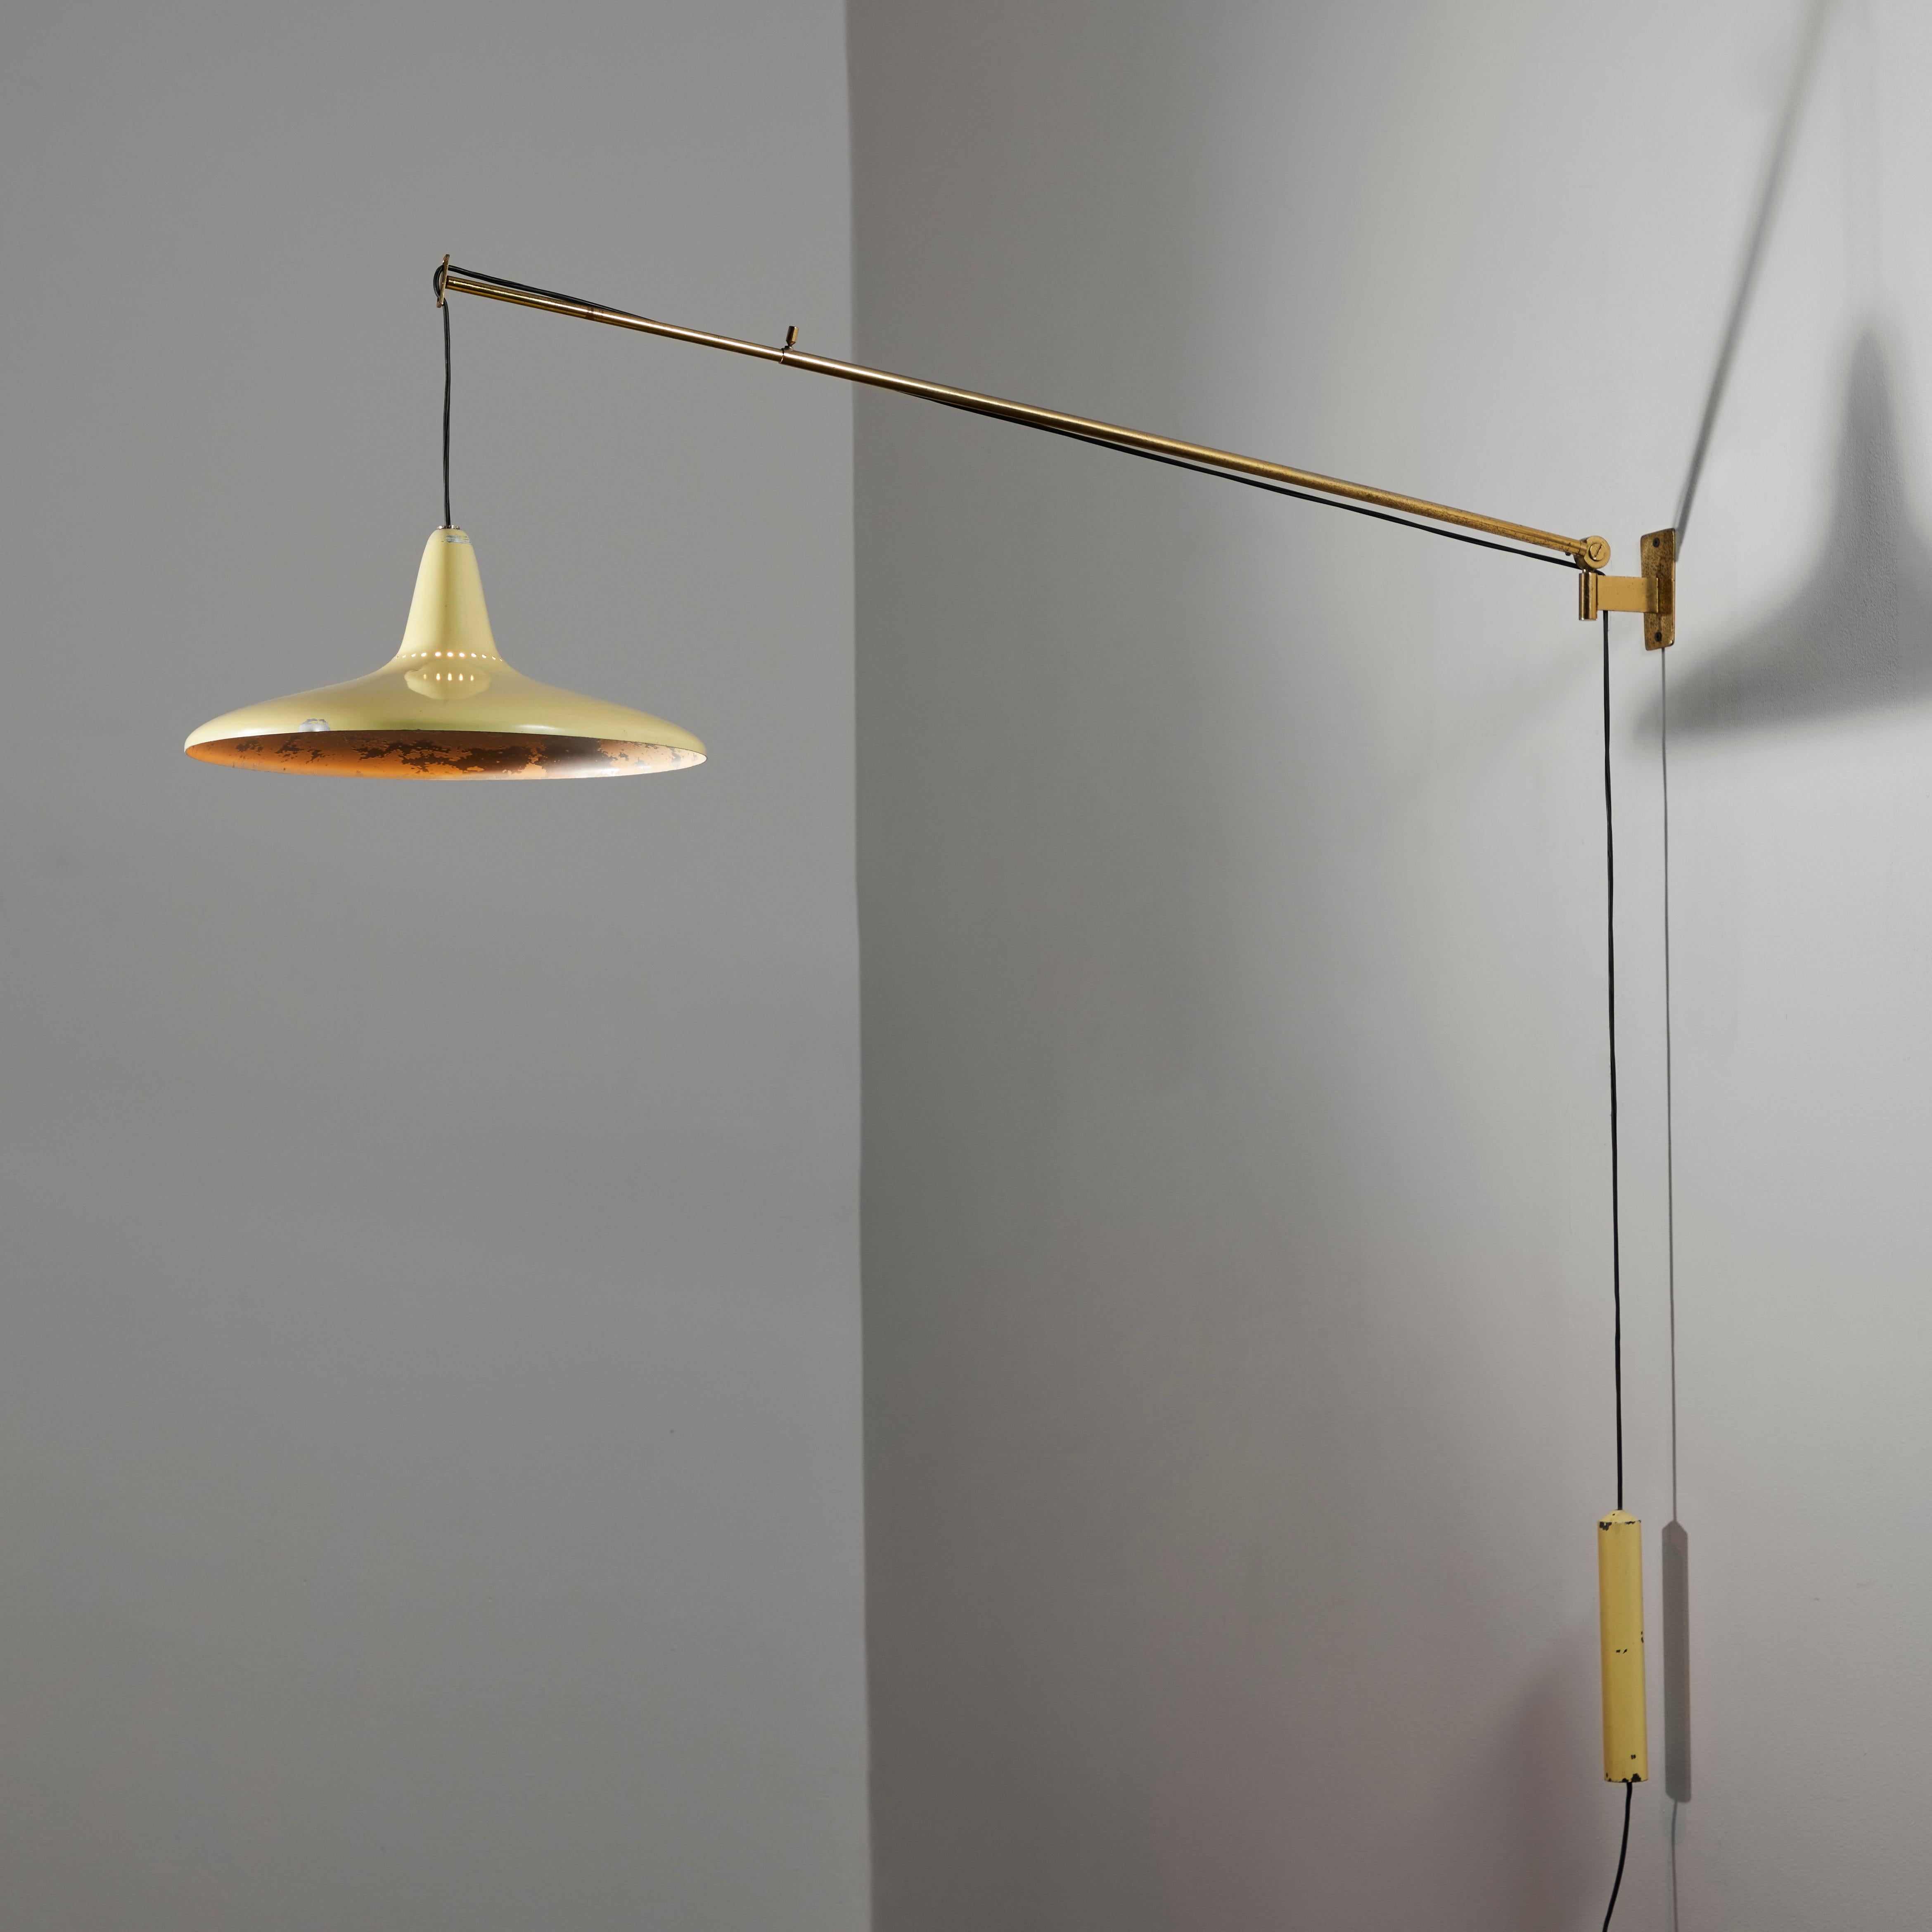 Wall lamp with pulley by Stilnovo. Manufactured in Italy, circa 1950's. Enameled metal, brass. Wired for U.S. standards. Recommend Lamping: 120v 1 Qty E27 Socket 60w Frosted Bulb. Lightbulbs not included.